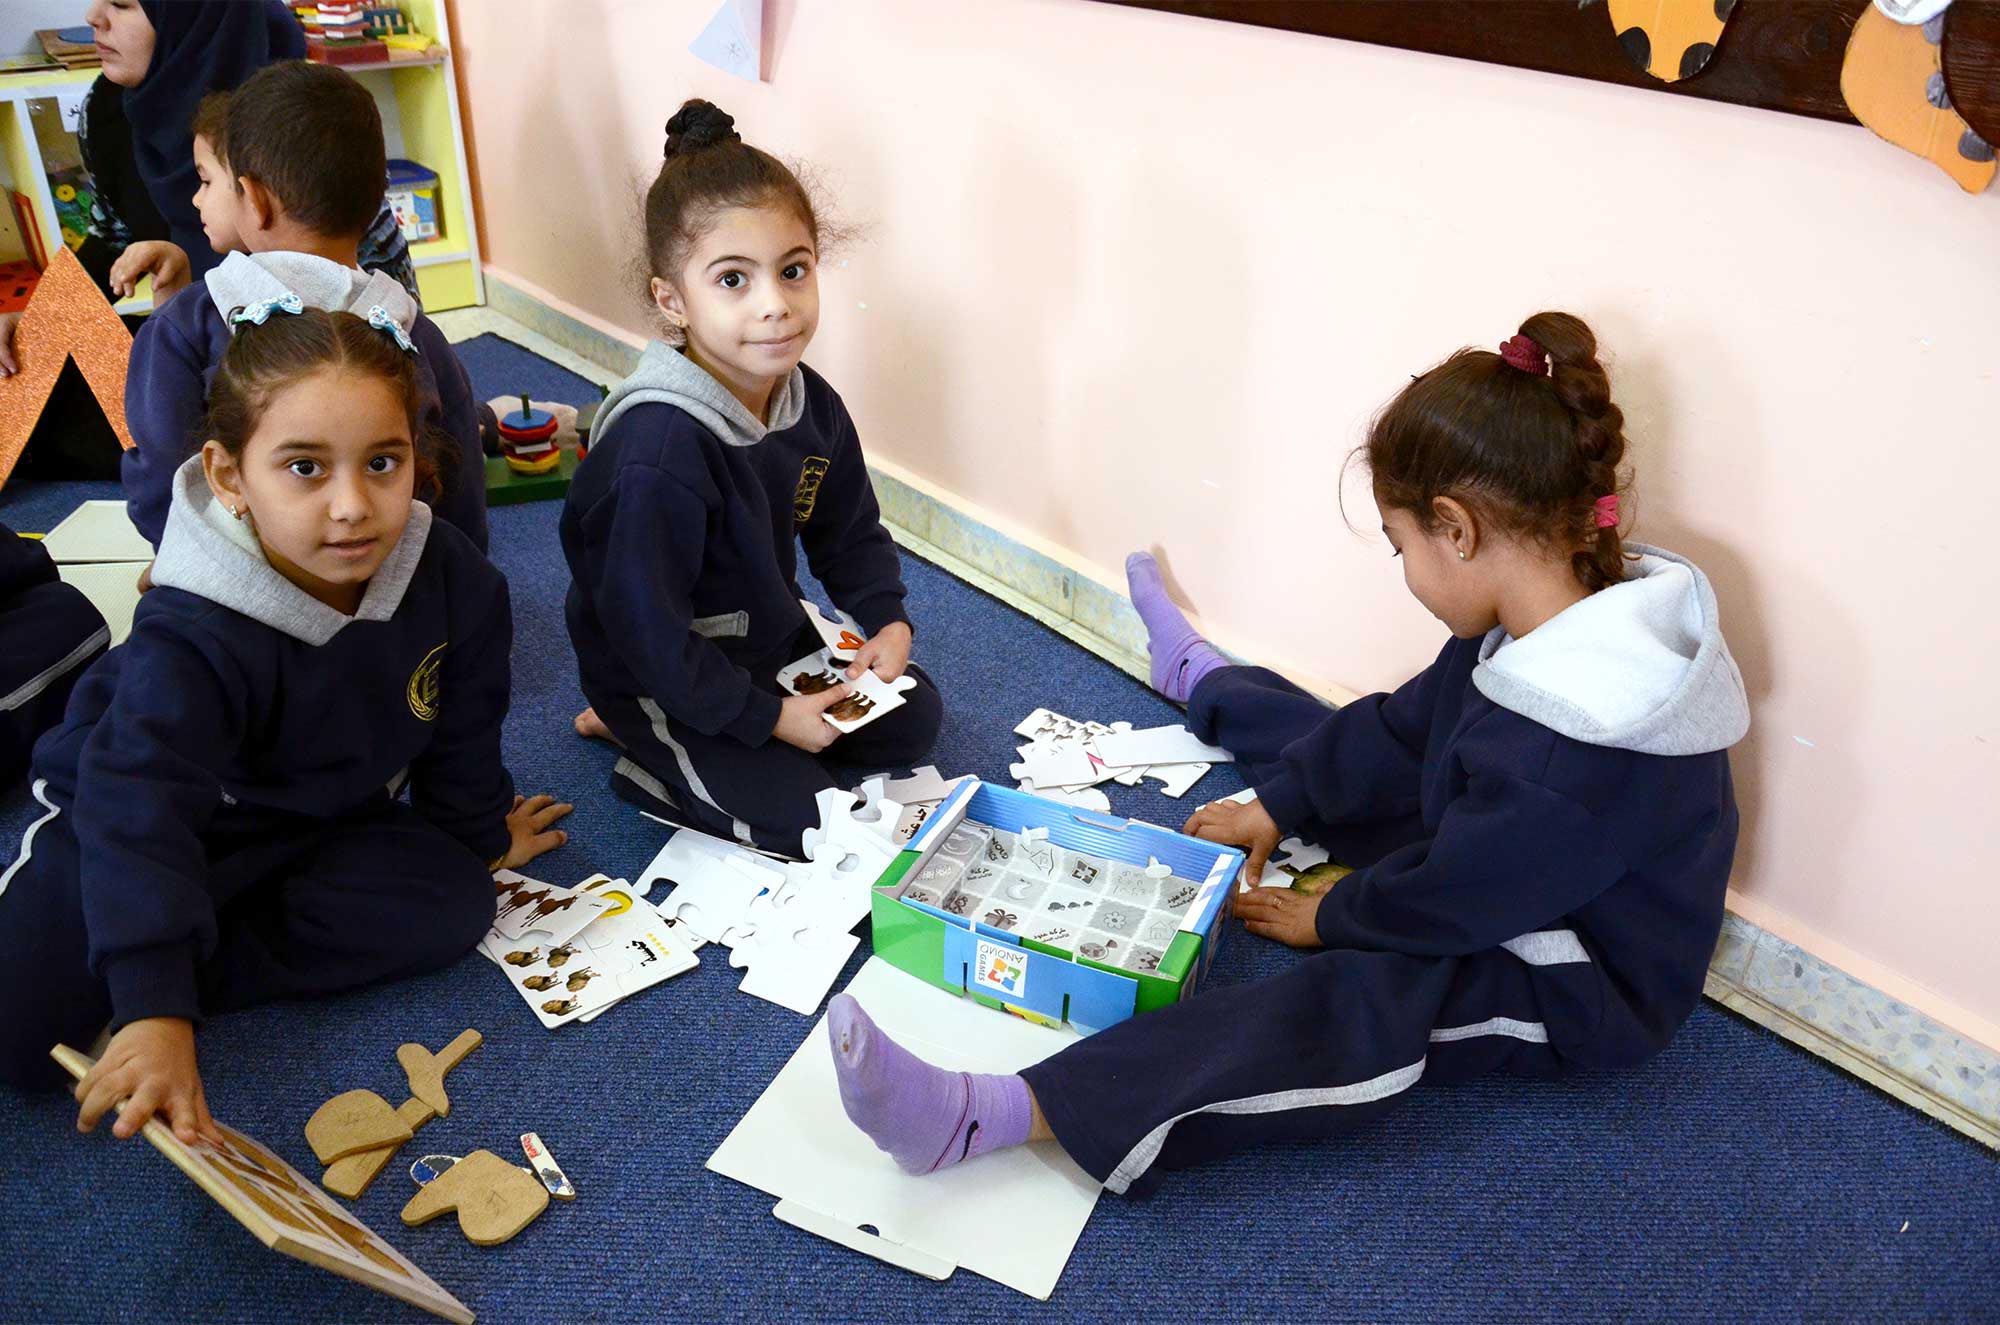 In Palestine preschools, kids now play and learn in small groups.